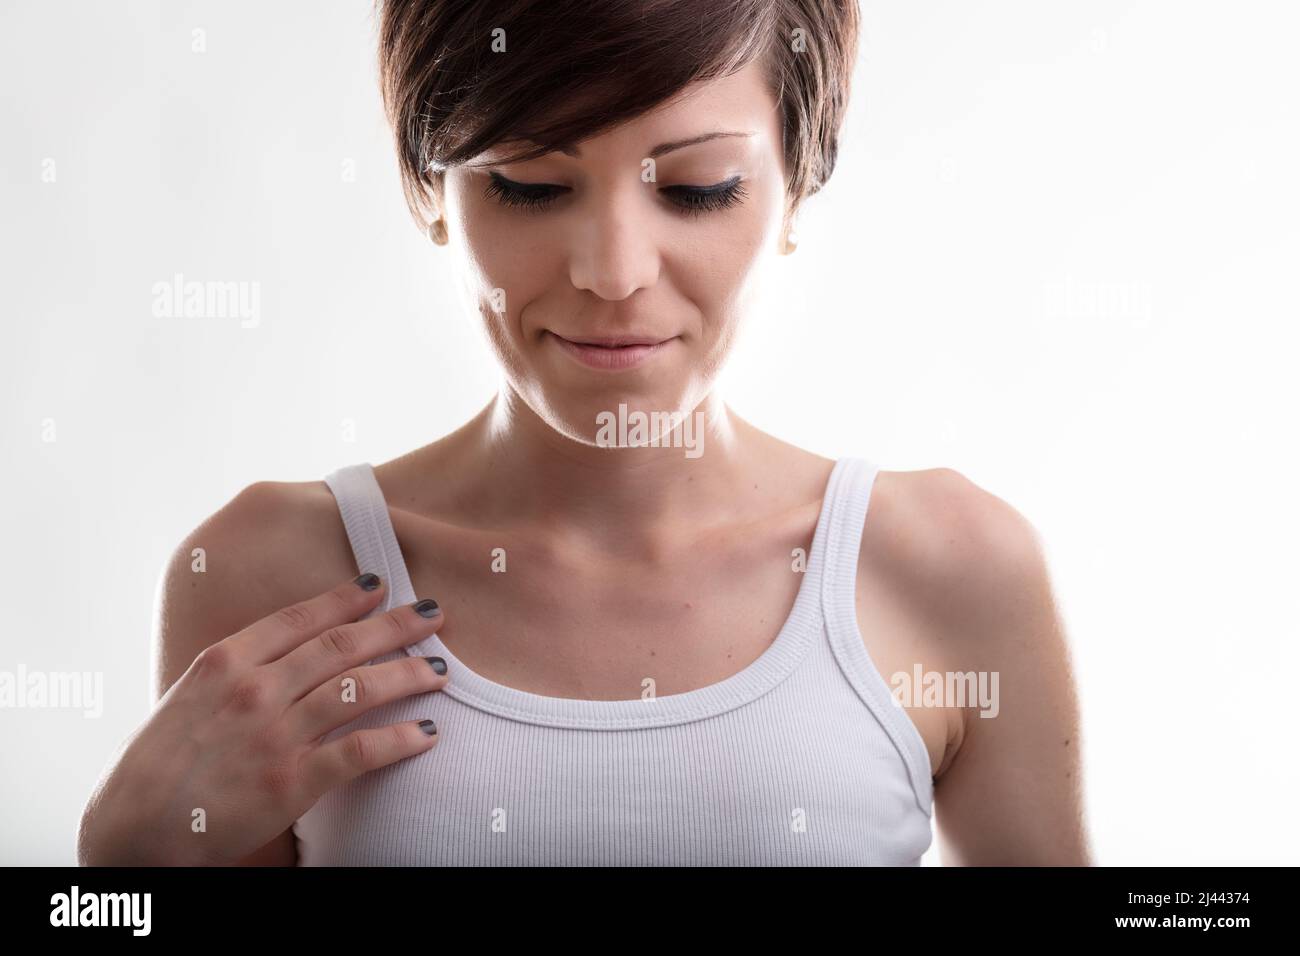 Demure young woman with her hand to her chest looking down with downcast eyes and a quiet smile in a cropped close up Stock Photo